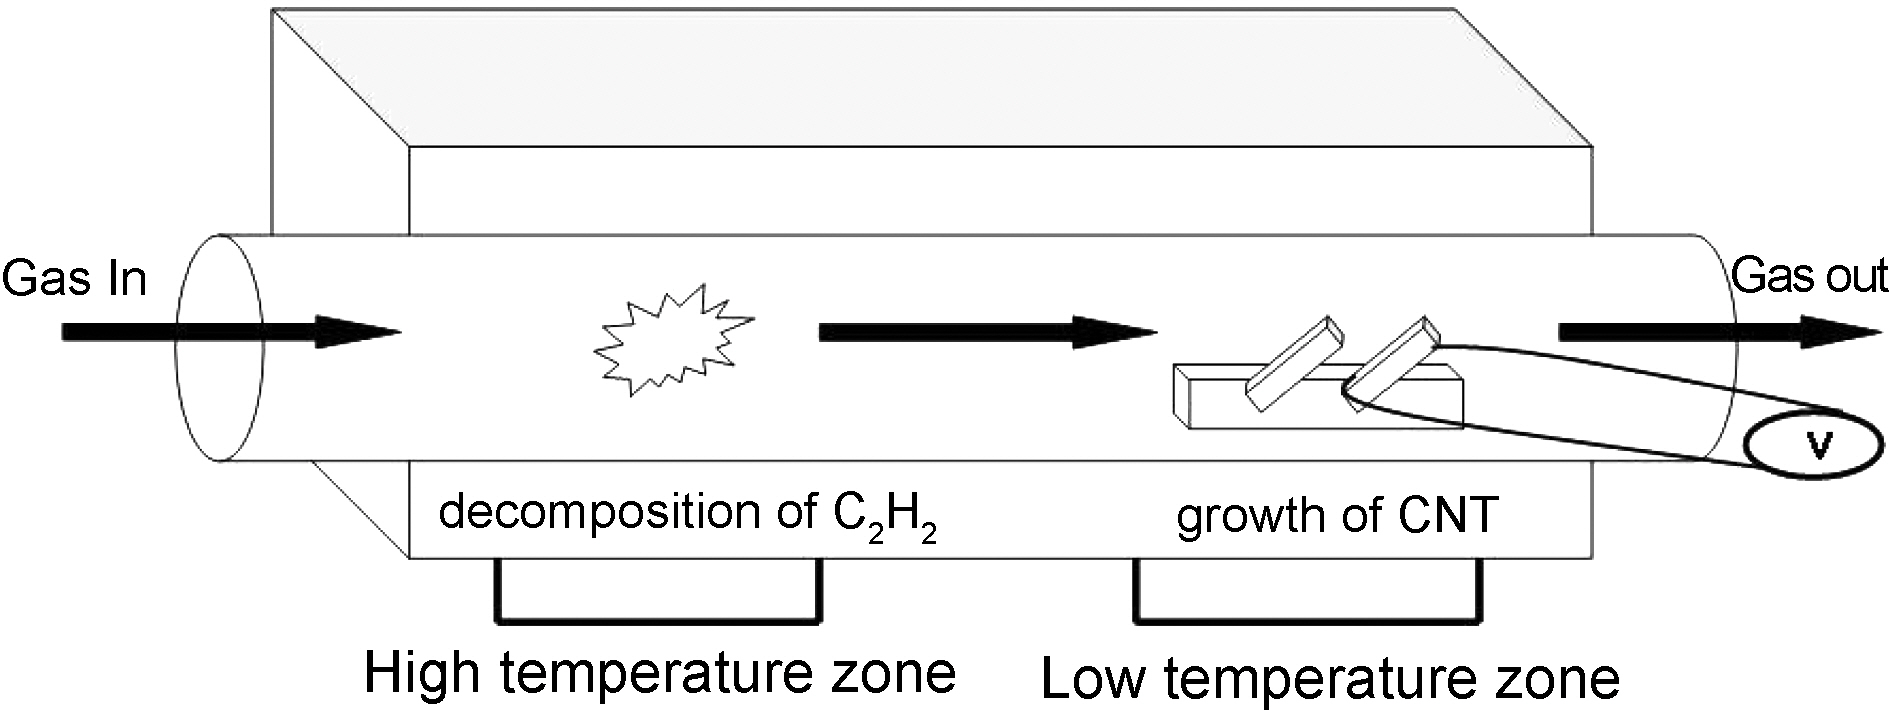 Schematic diagram of two-temperature zone CVD system used for the growth of carbon nanotubes.